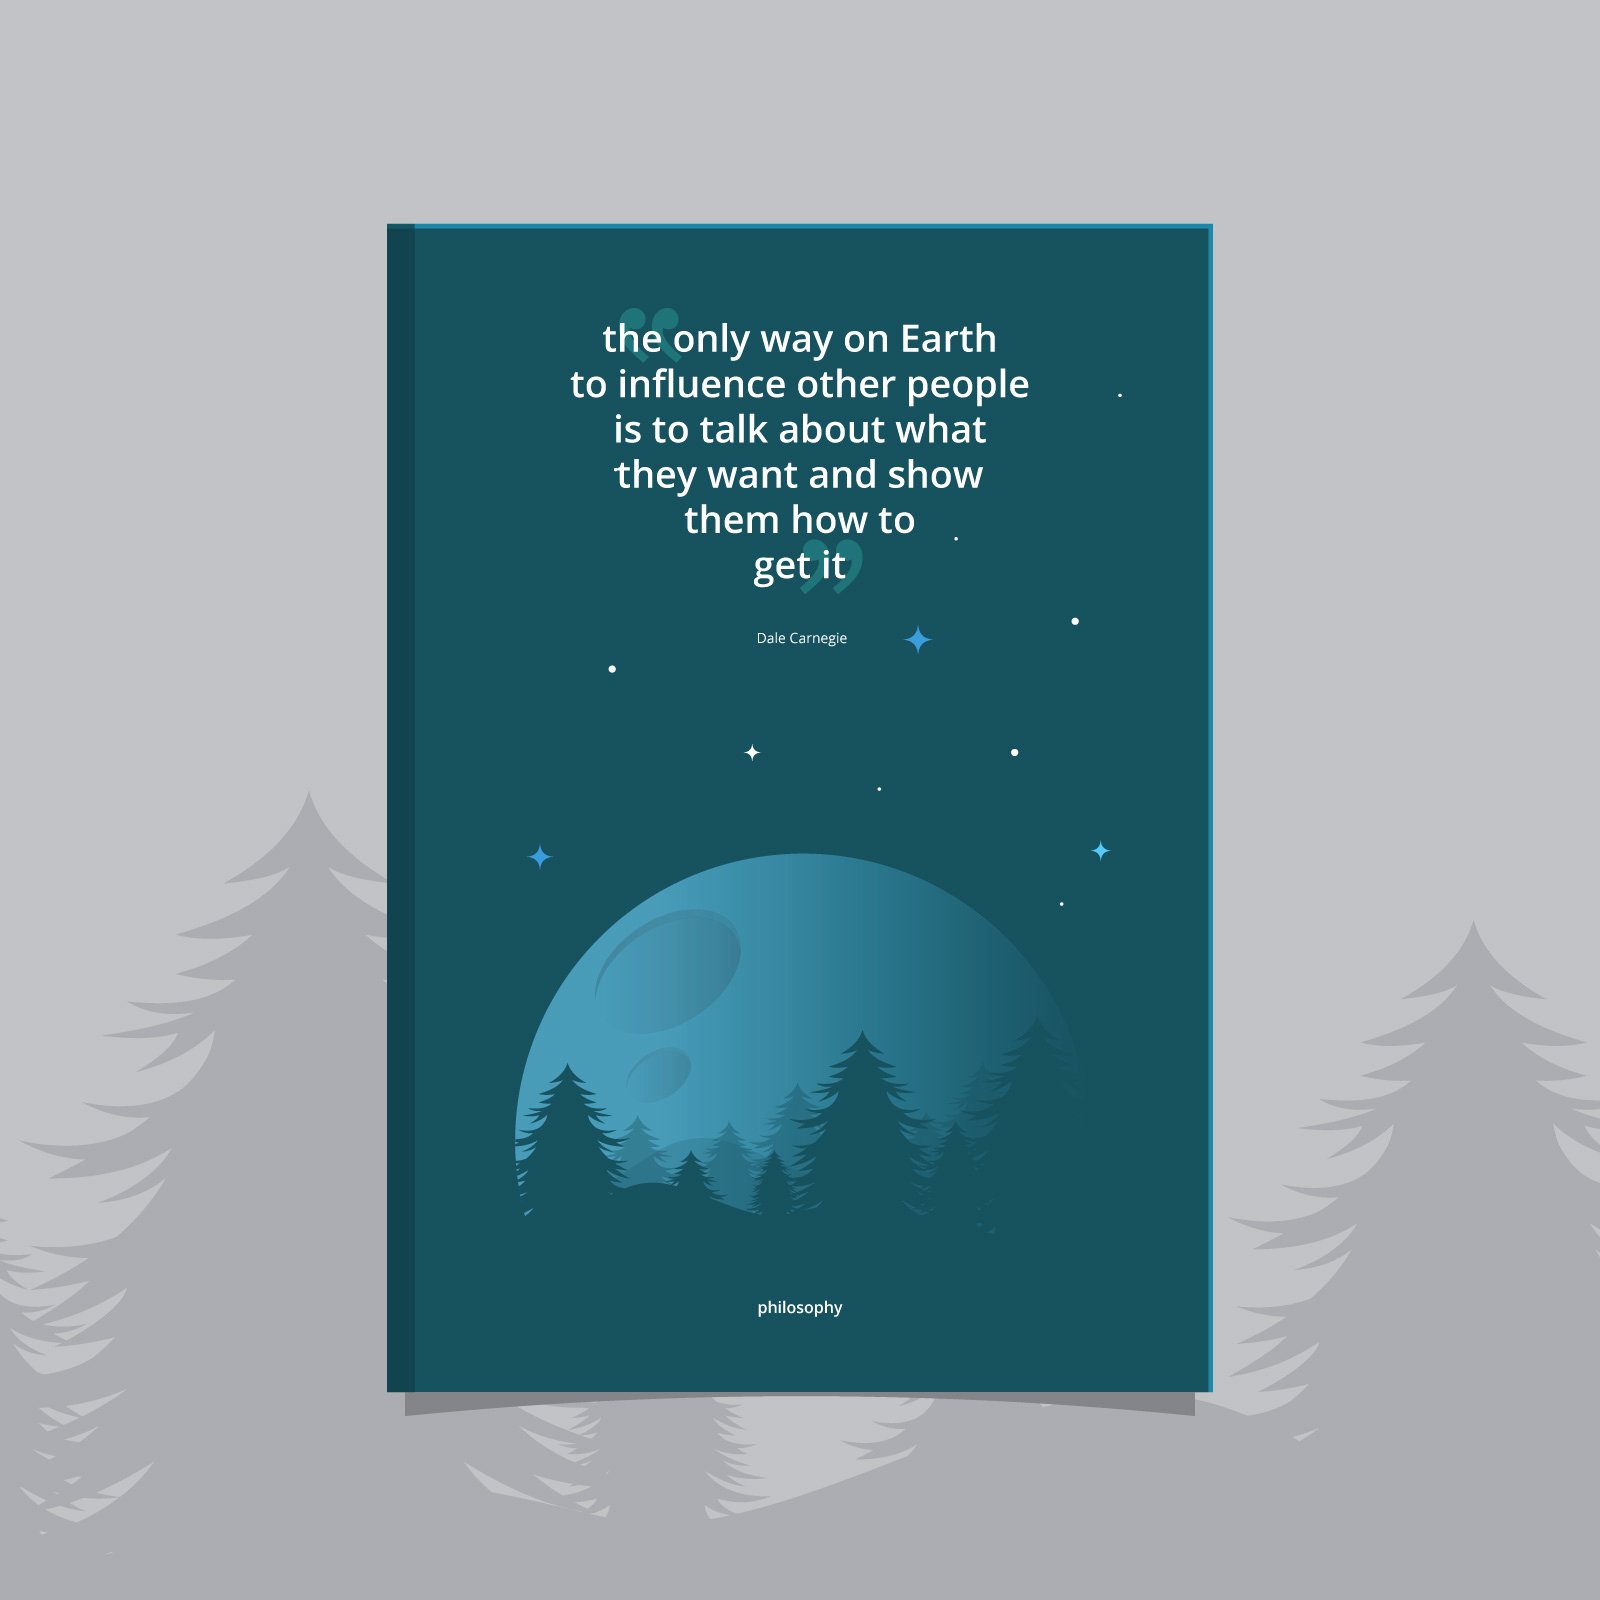 Book Cover Template Illustrator Lovely Philosophy Book with Philosophy Quotes and Space